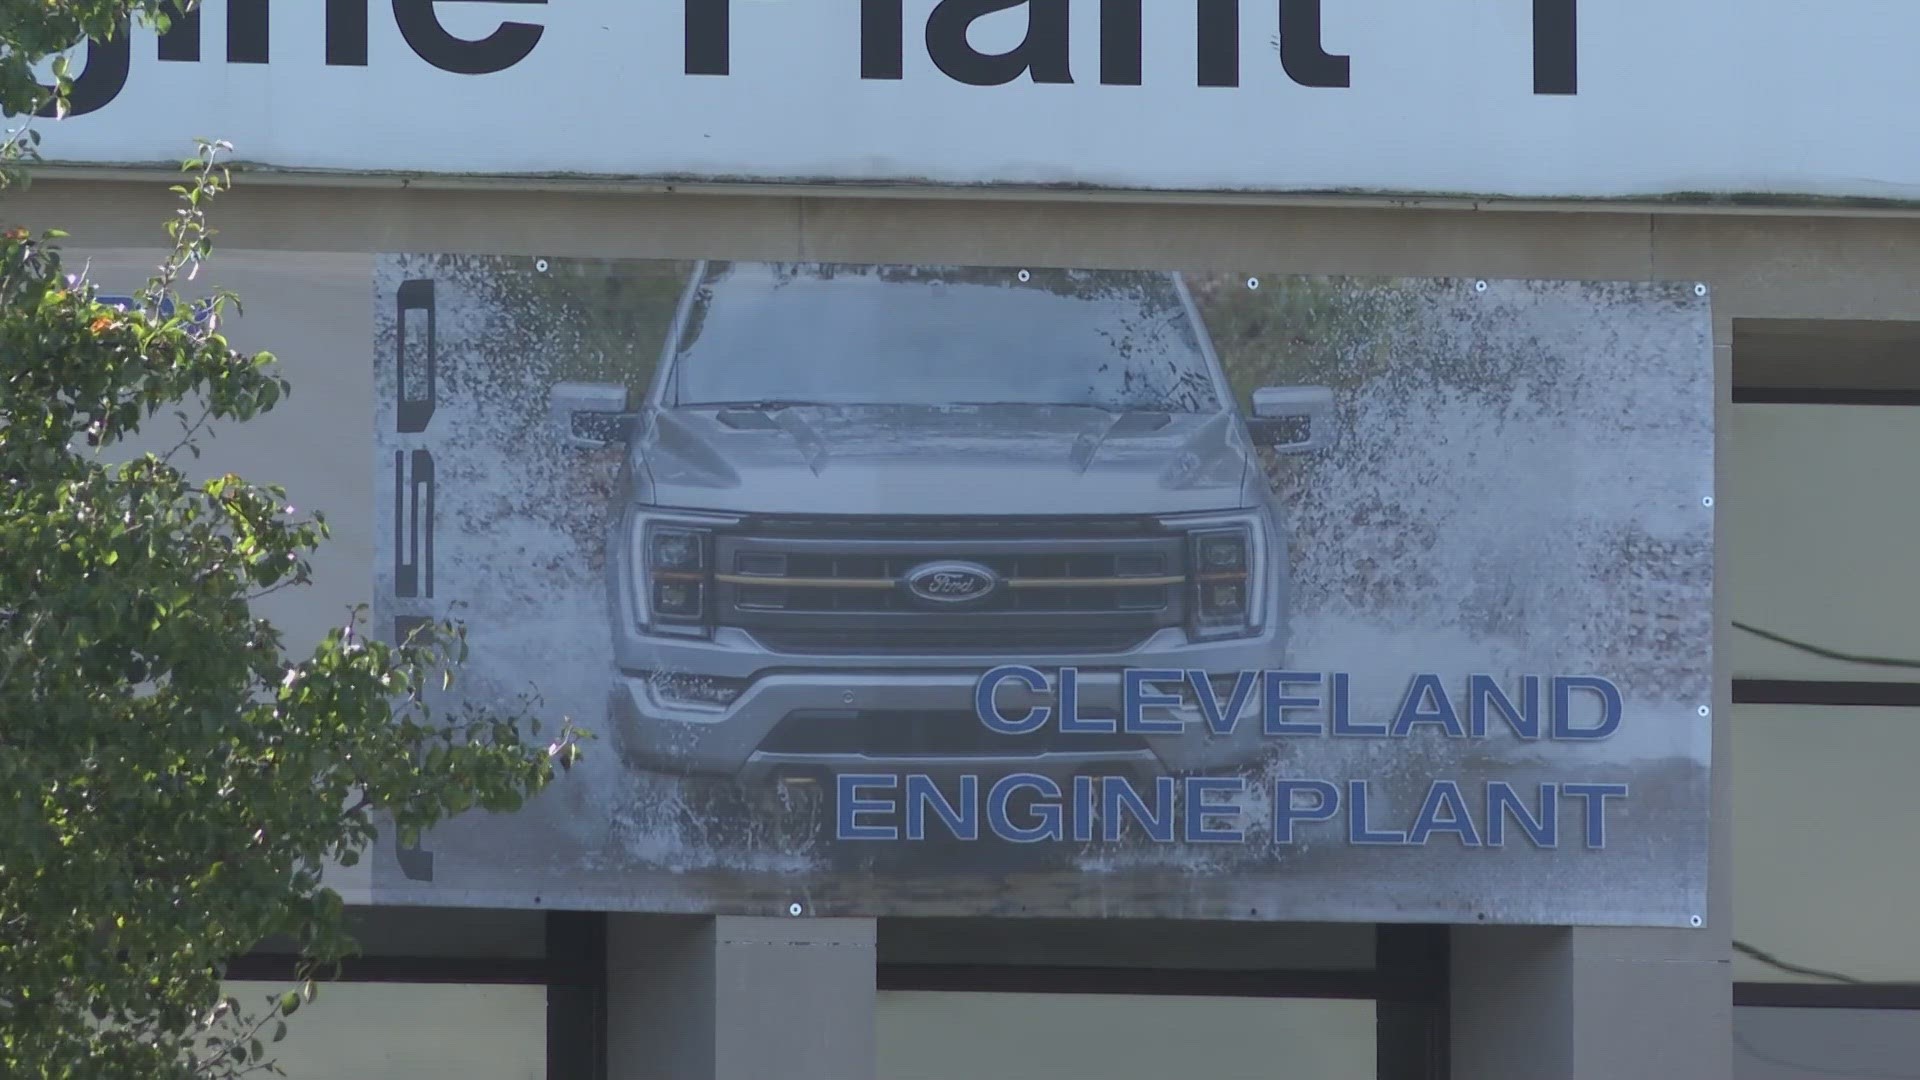 The UAW Local 1250 says the Cleveland engine plant in Brook Park feeds vehicle motors to plants in Detroit and Chicago, where workers are currently on strike.